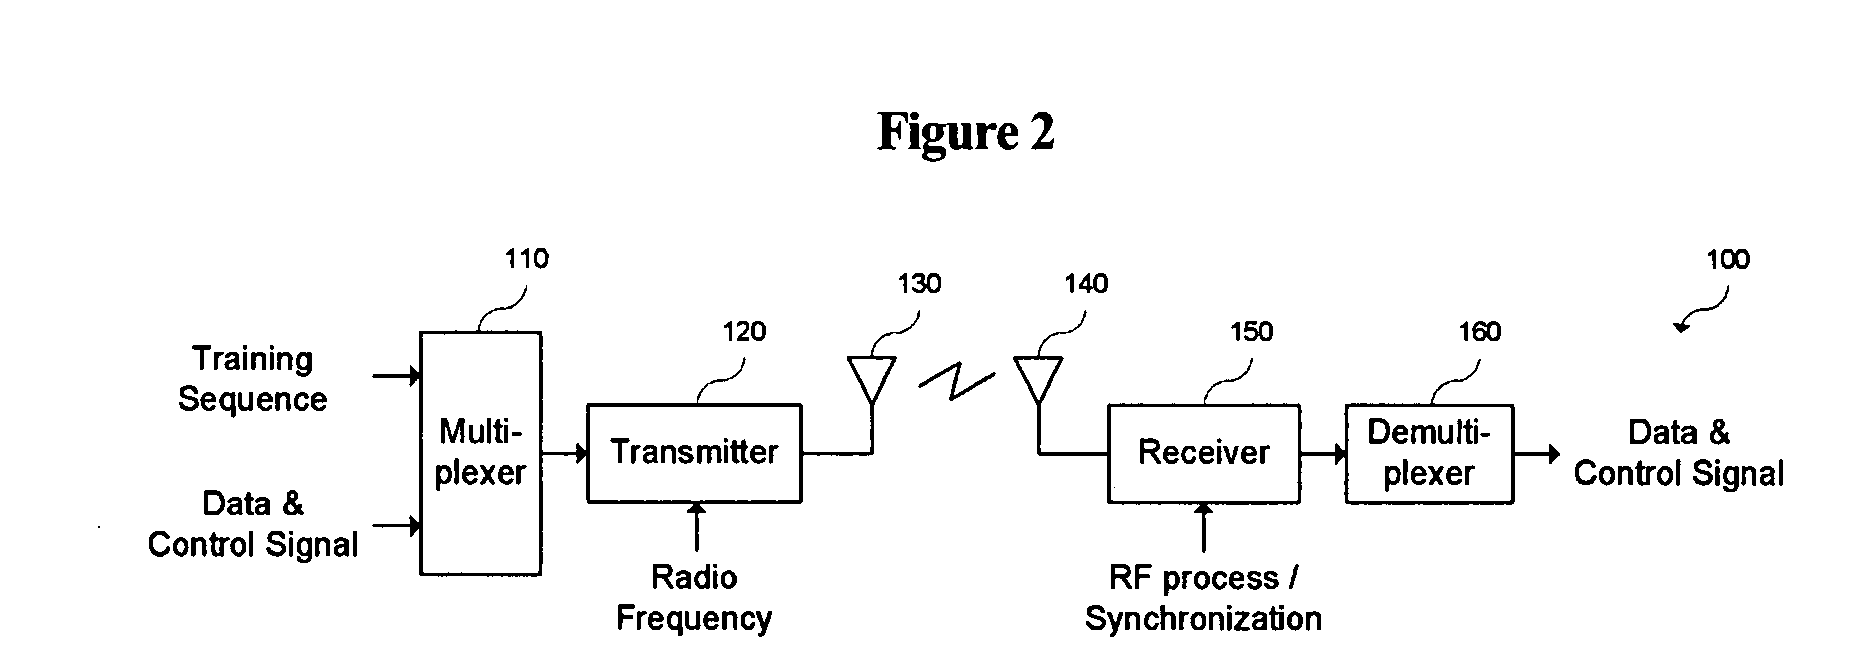 Training sequence for wireless communication system